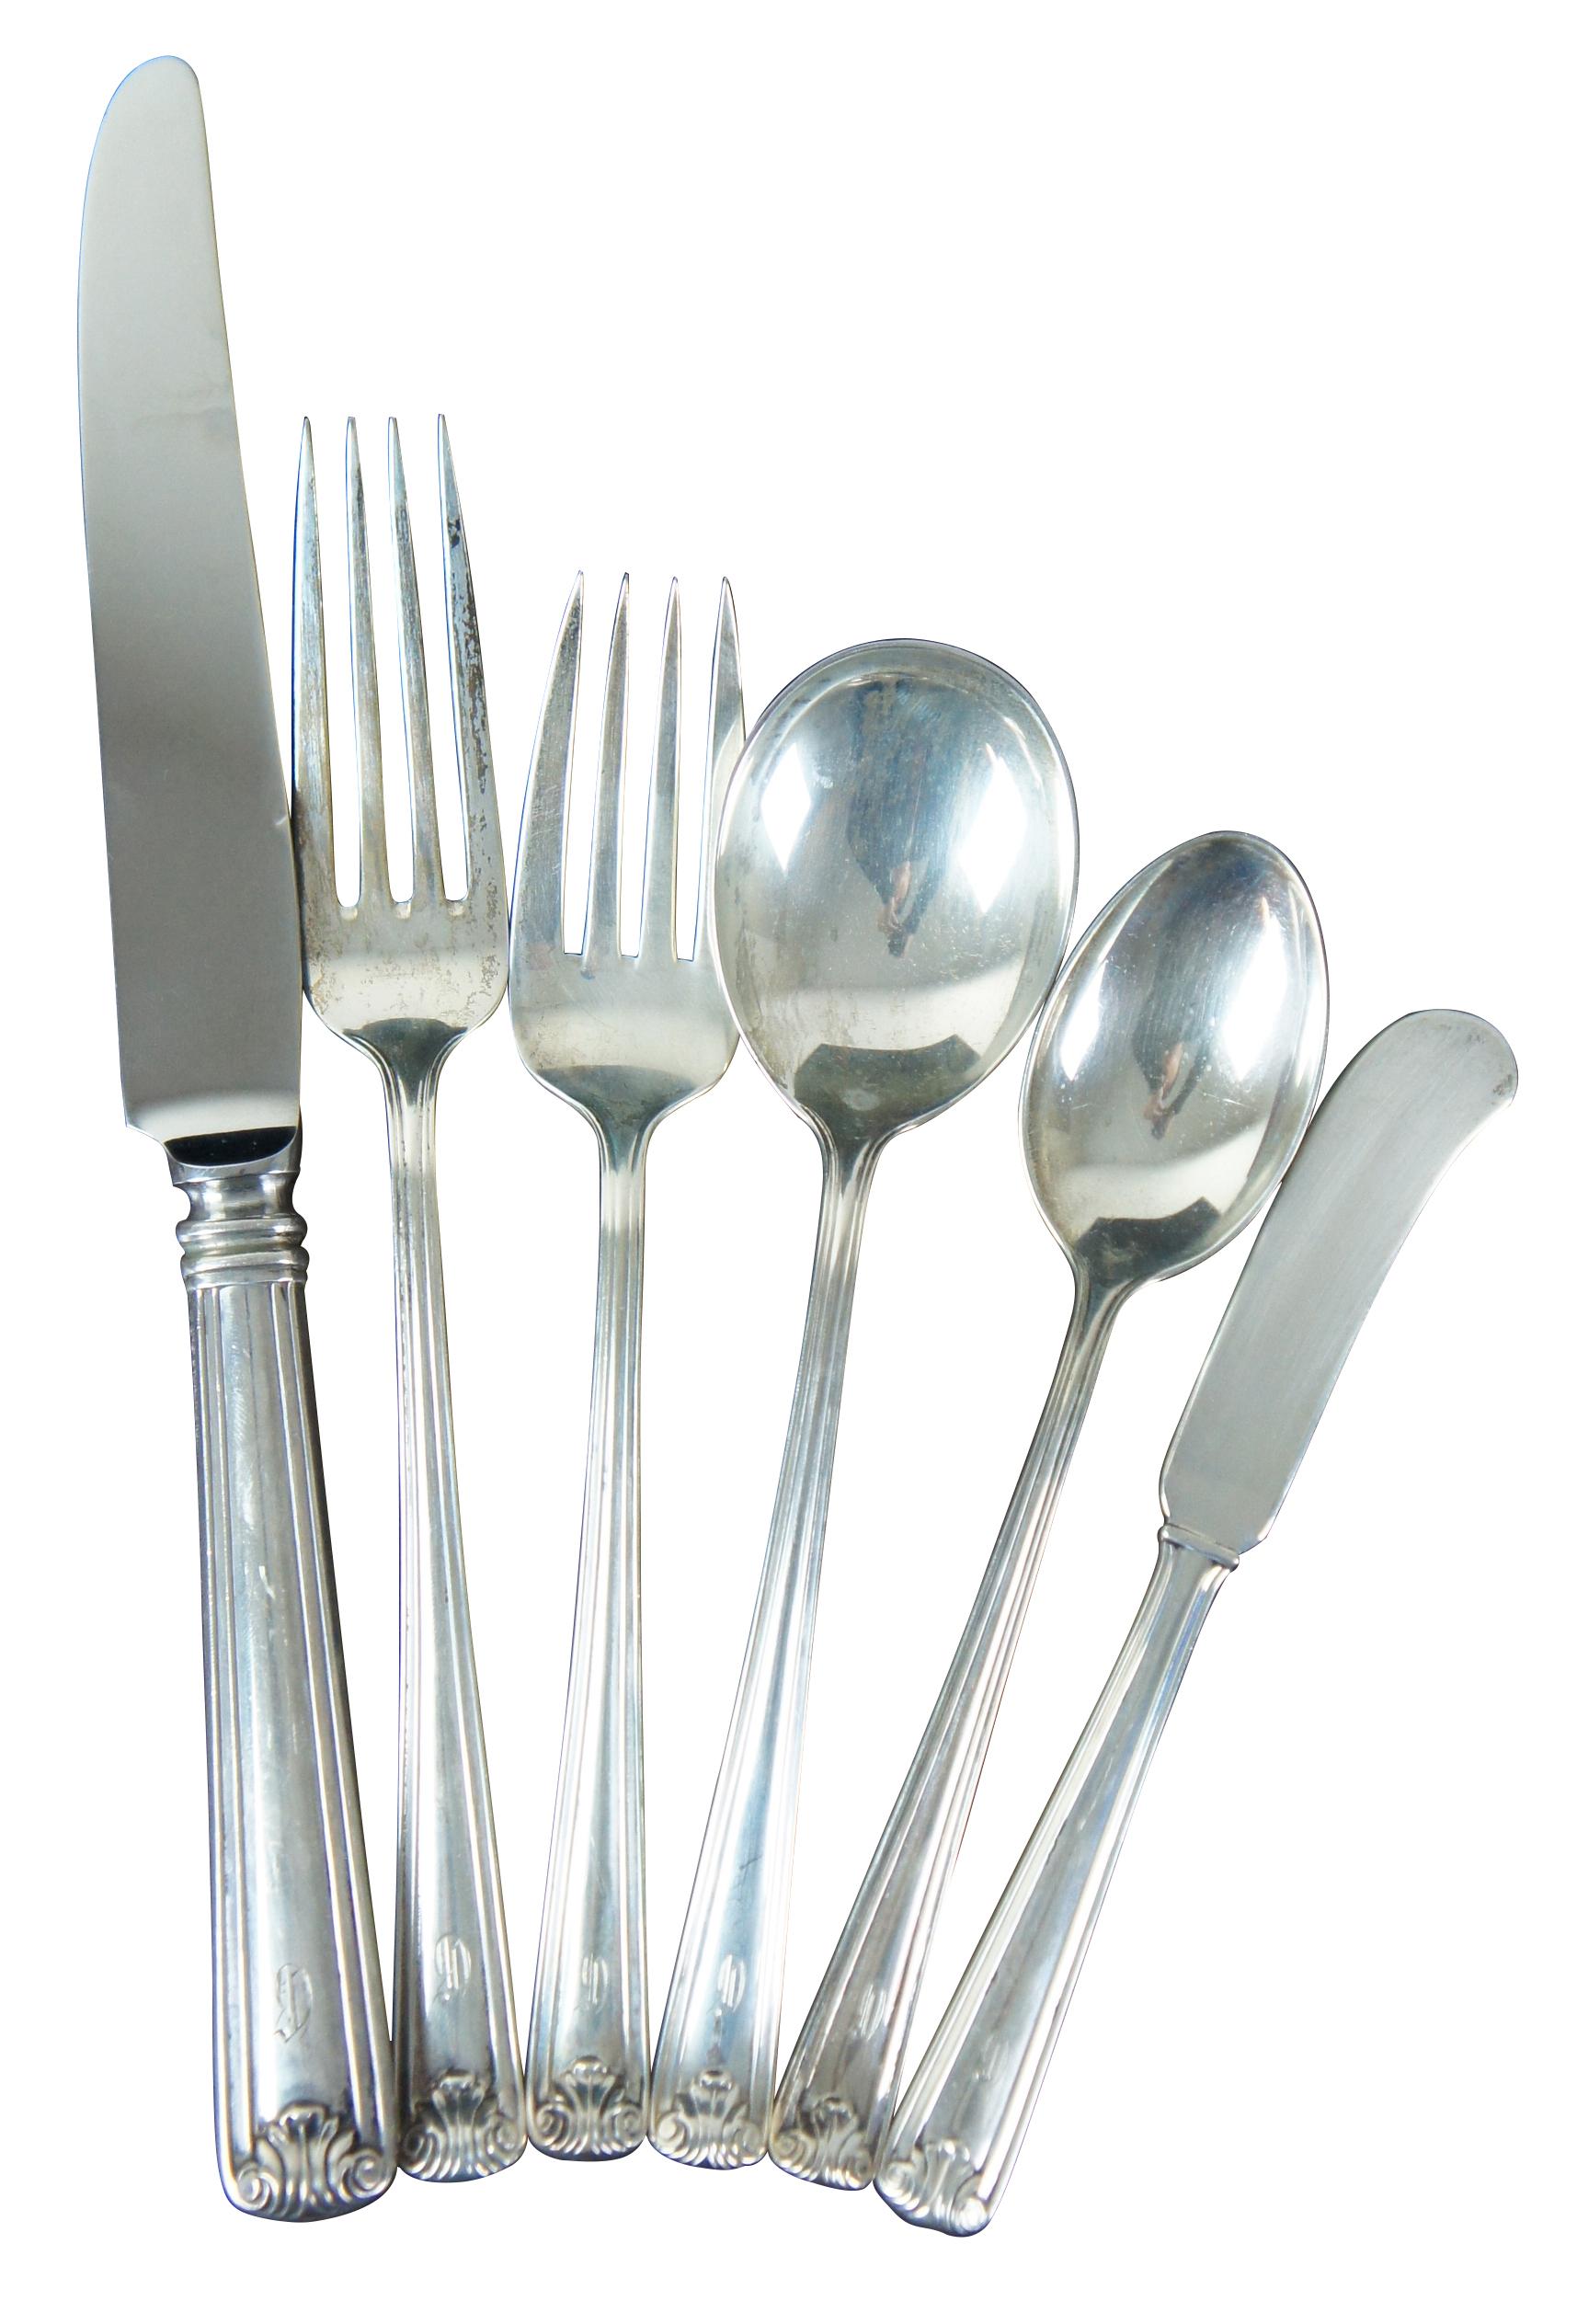 1940 Watson Windsor Manor sterling silver .925 flatware silverware set 71 PC

Measures: Chest – 16” x 11.5” x 3.5” / 11 table knives – 9” x 0.75” - 81.1g / 11 dinner forks – 7.25” x 1” - 46.6g / 12 teaspoons – 6” x 1.25” - 27.4g / 10 soup spoons –